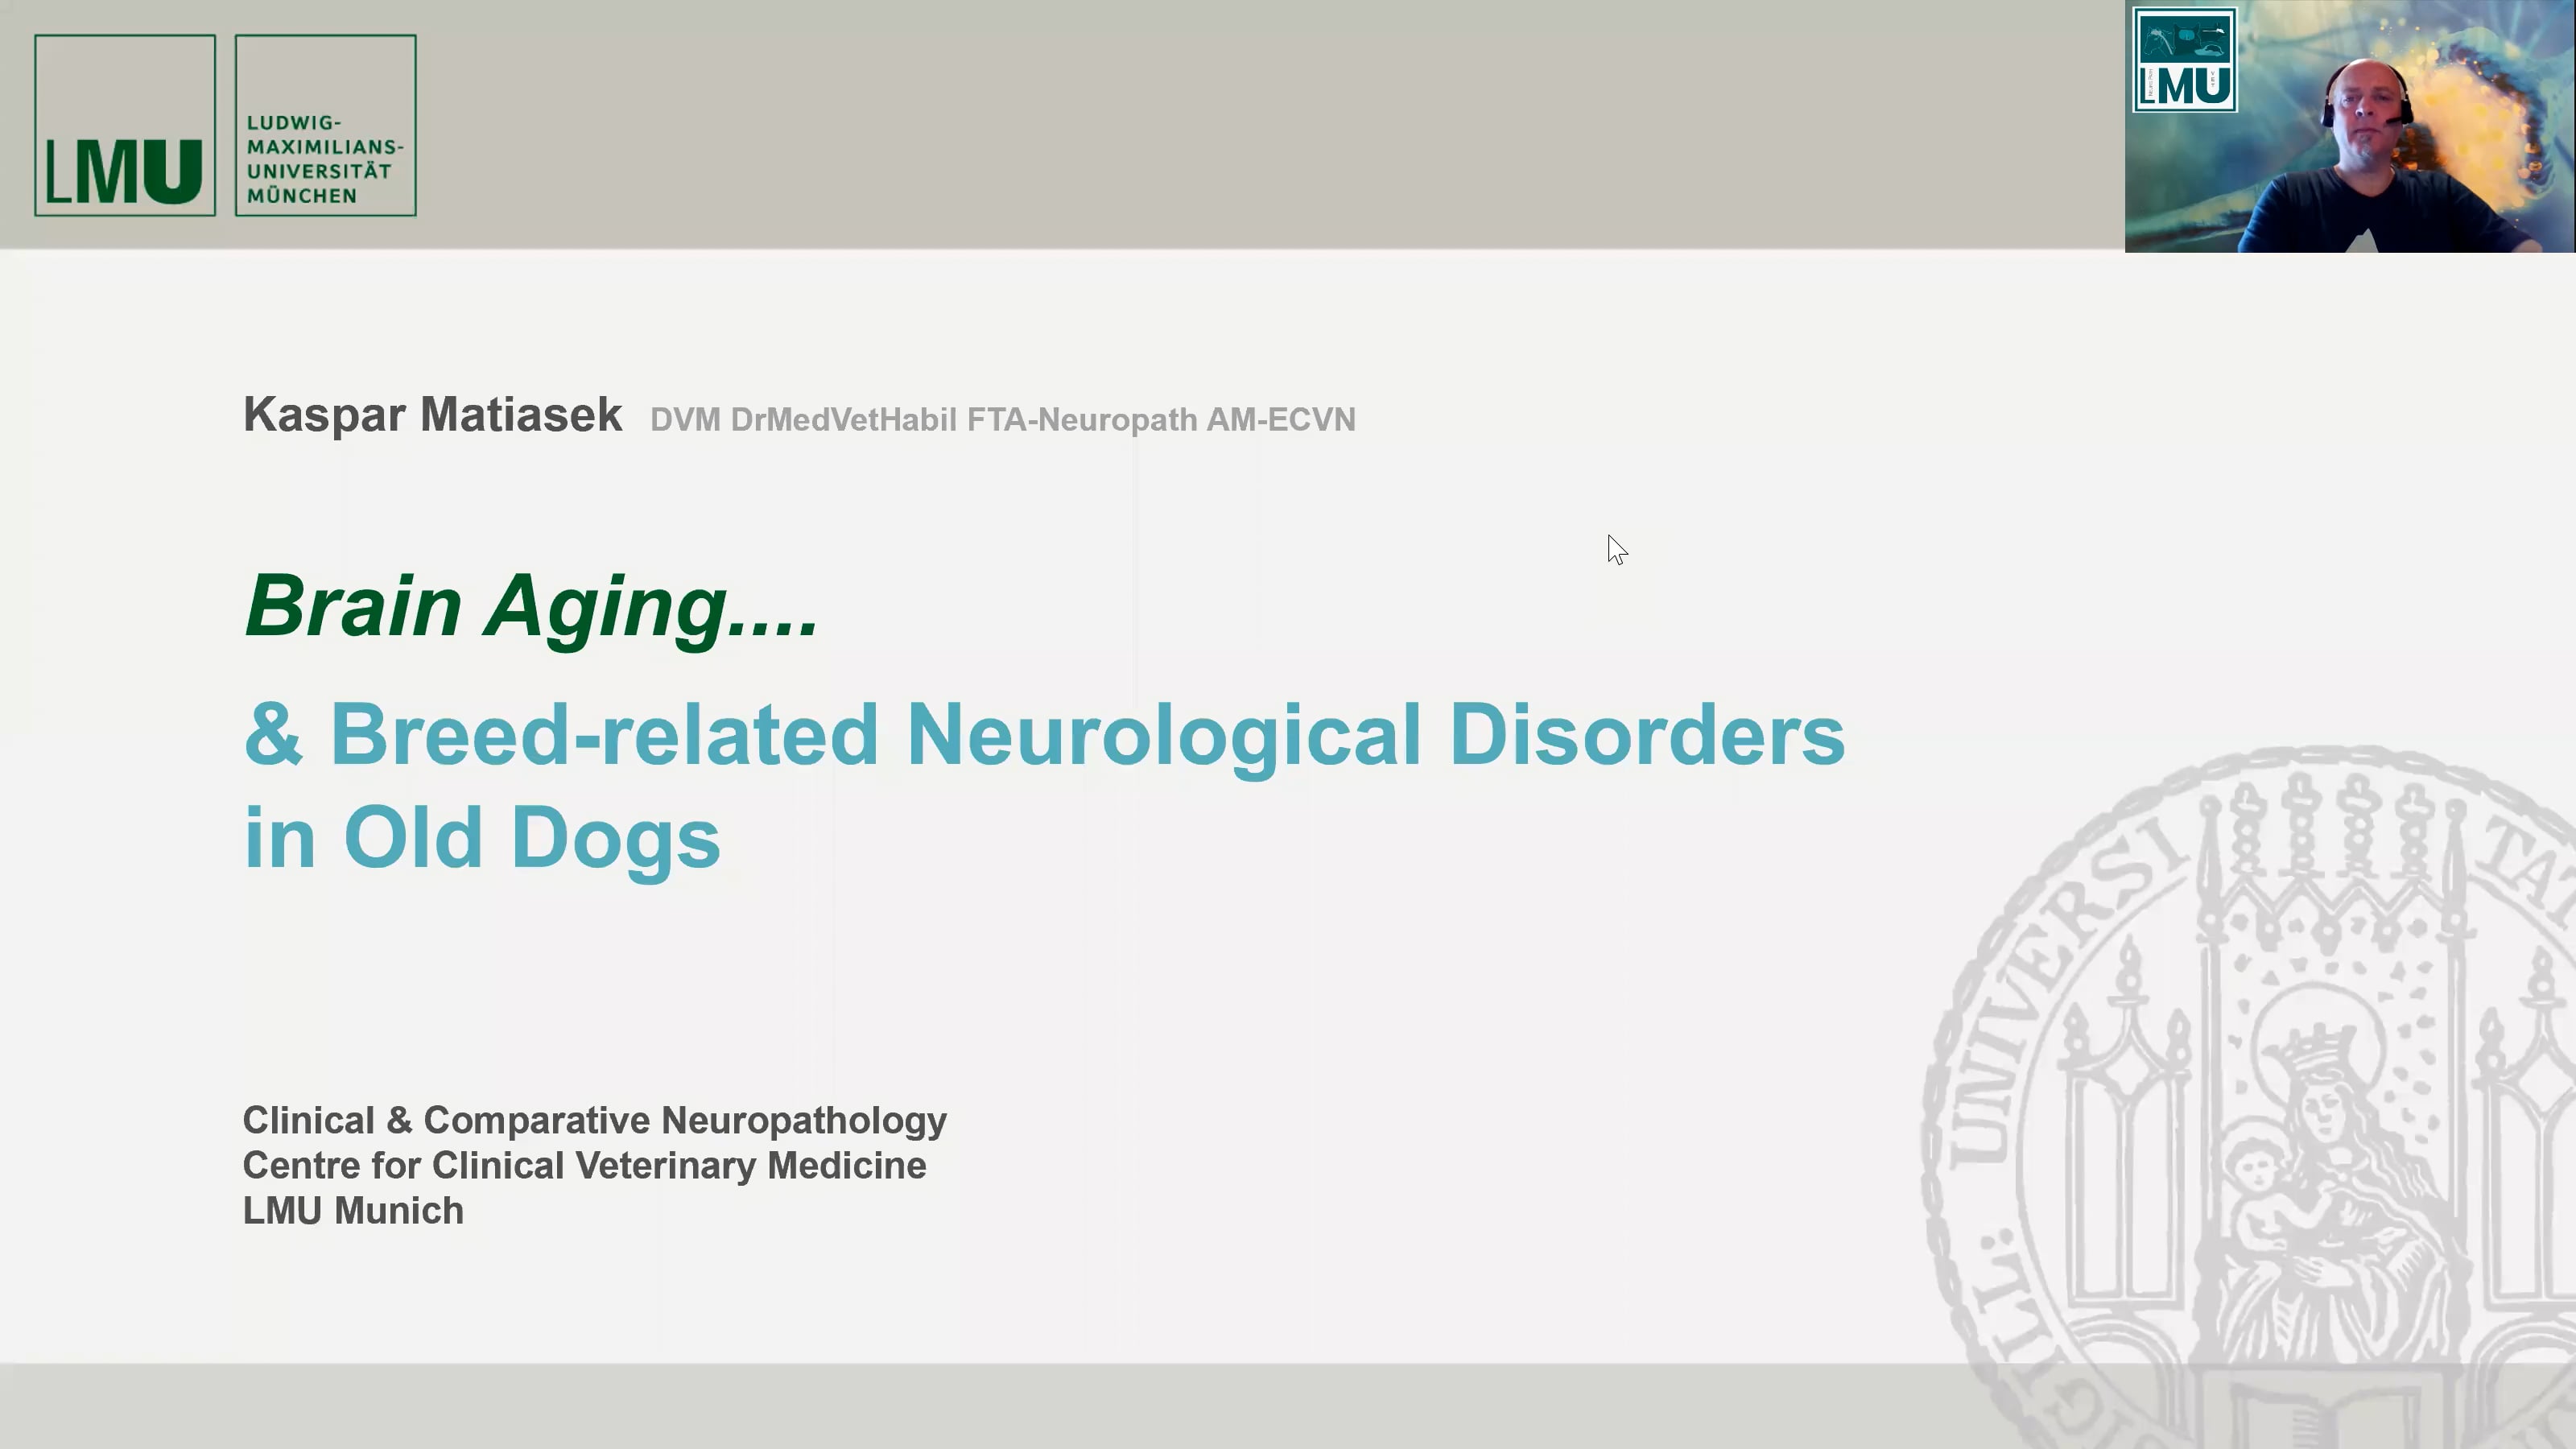 Pathological aging and late-onset diseases of the nervous system in dogs